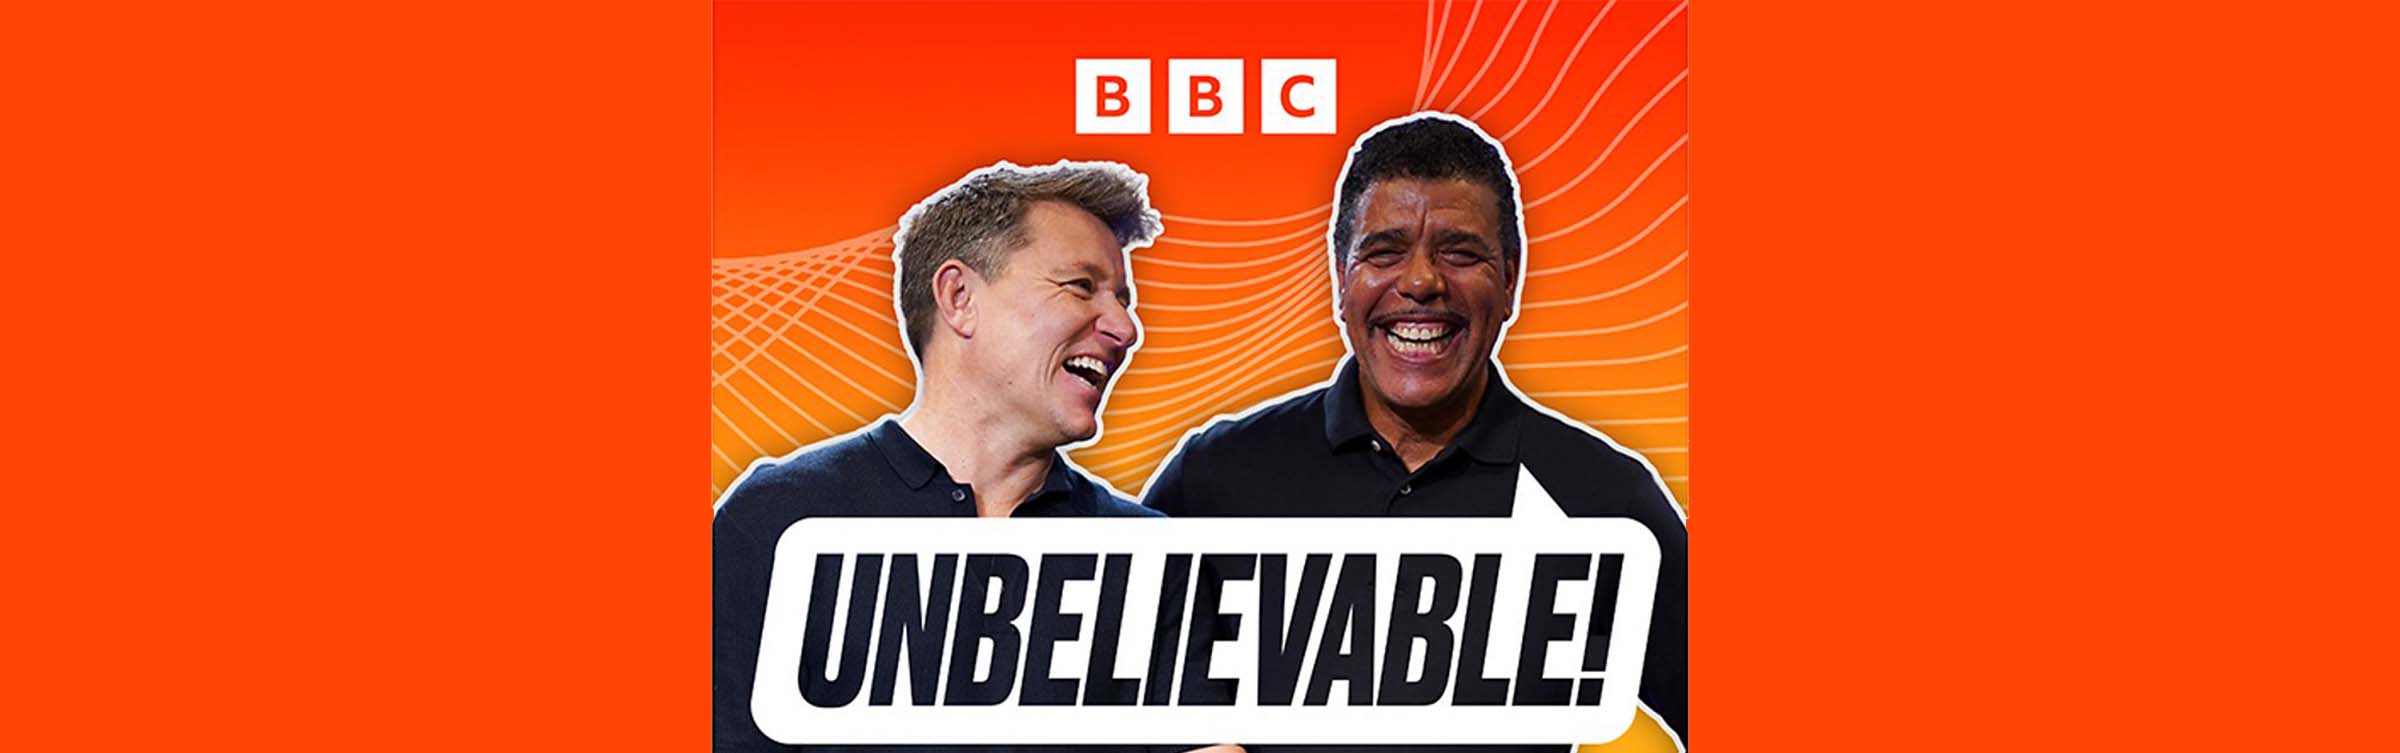 Chris kamara and ben shephard join forces to present unbelievable, a new bbc sounds and bbc radio 5 live podcast